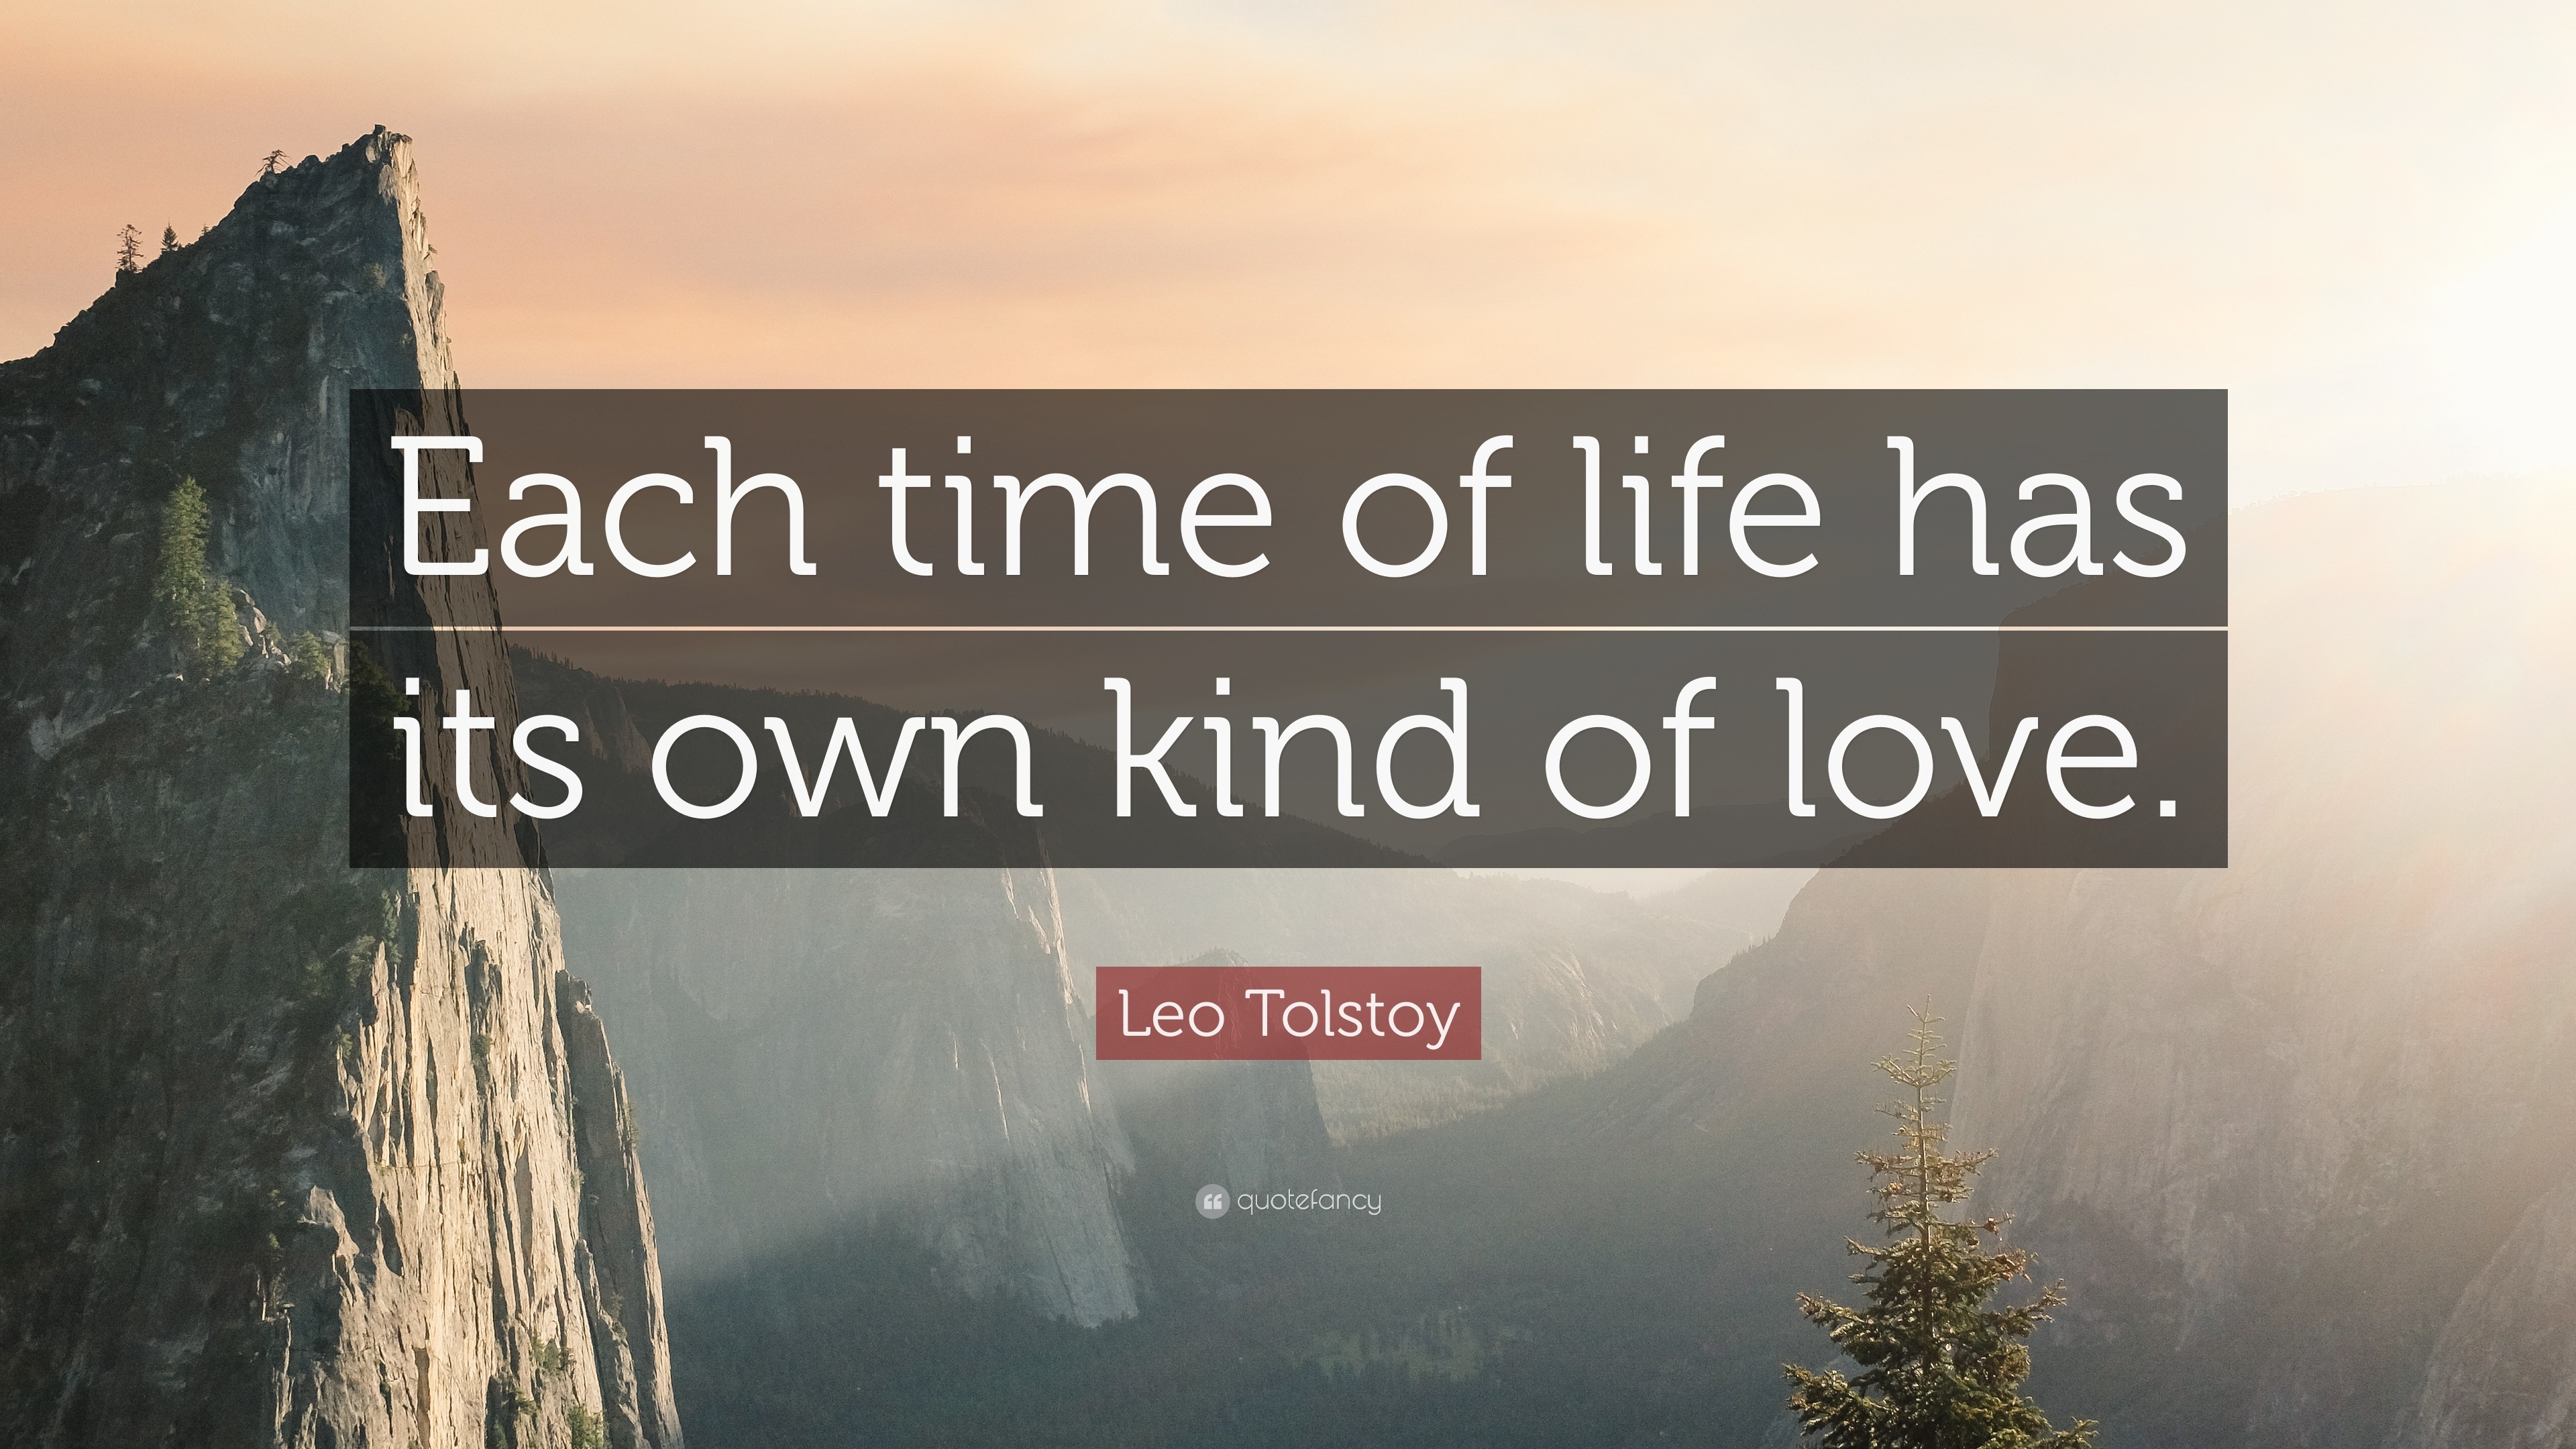 Leo Tolstoy Quote: “Each time of life has its own kind of love.”